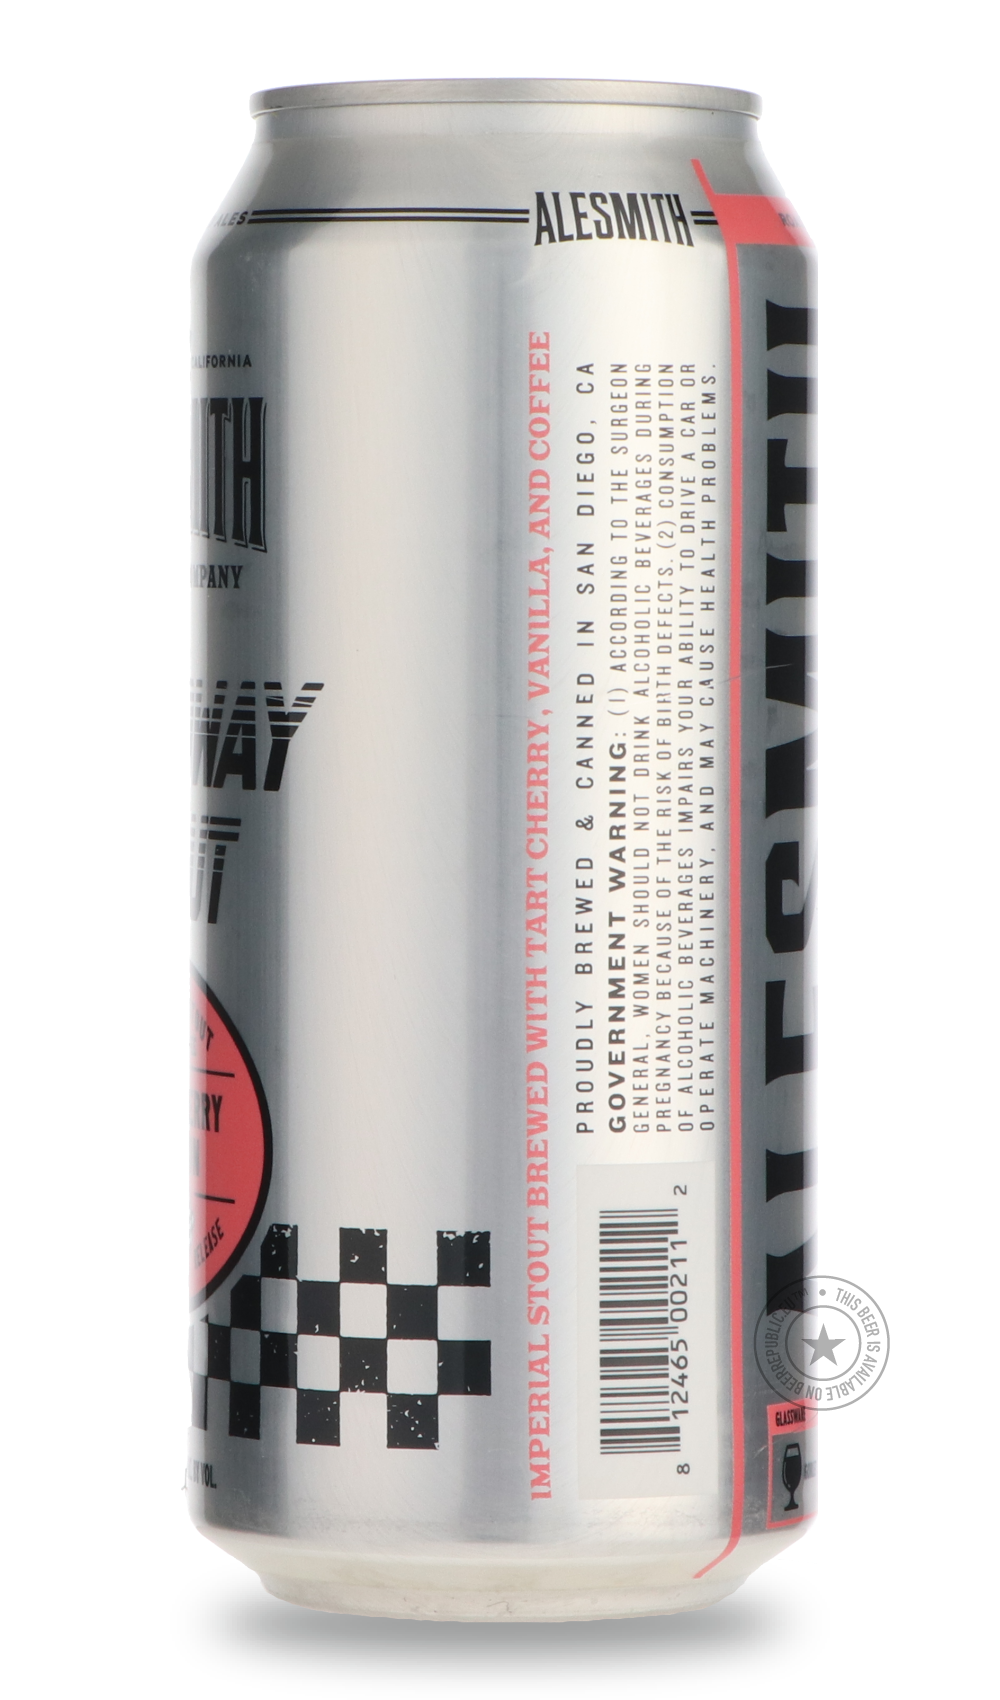 -AleSmith- Speedway Stout Tart Cherry-Stout & Porter- Only @ Beer Republic - The best online beer store for American & Canadian craft beer - Buy beer online from the USA and Canada - Bier online kopen - Amerikaans bier kopen - Craft beer store - Craft beer kopen - Amerikanisch bier kaufen - Bier online kaufen - Acheter biere online - IPA - Stout - Porter - New England IPA - Hazy IPA - Imperial Stout - Barrel Aged - Barrel Aged Imperial Stout - Brown - Dark beer - Blond - Blonde - Pilsner - Lager - Wheat - W